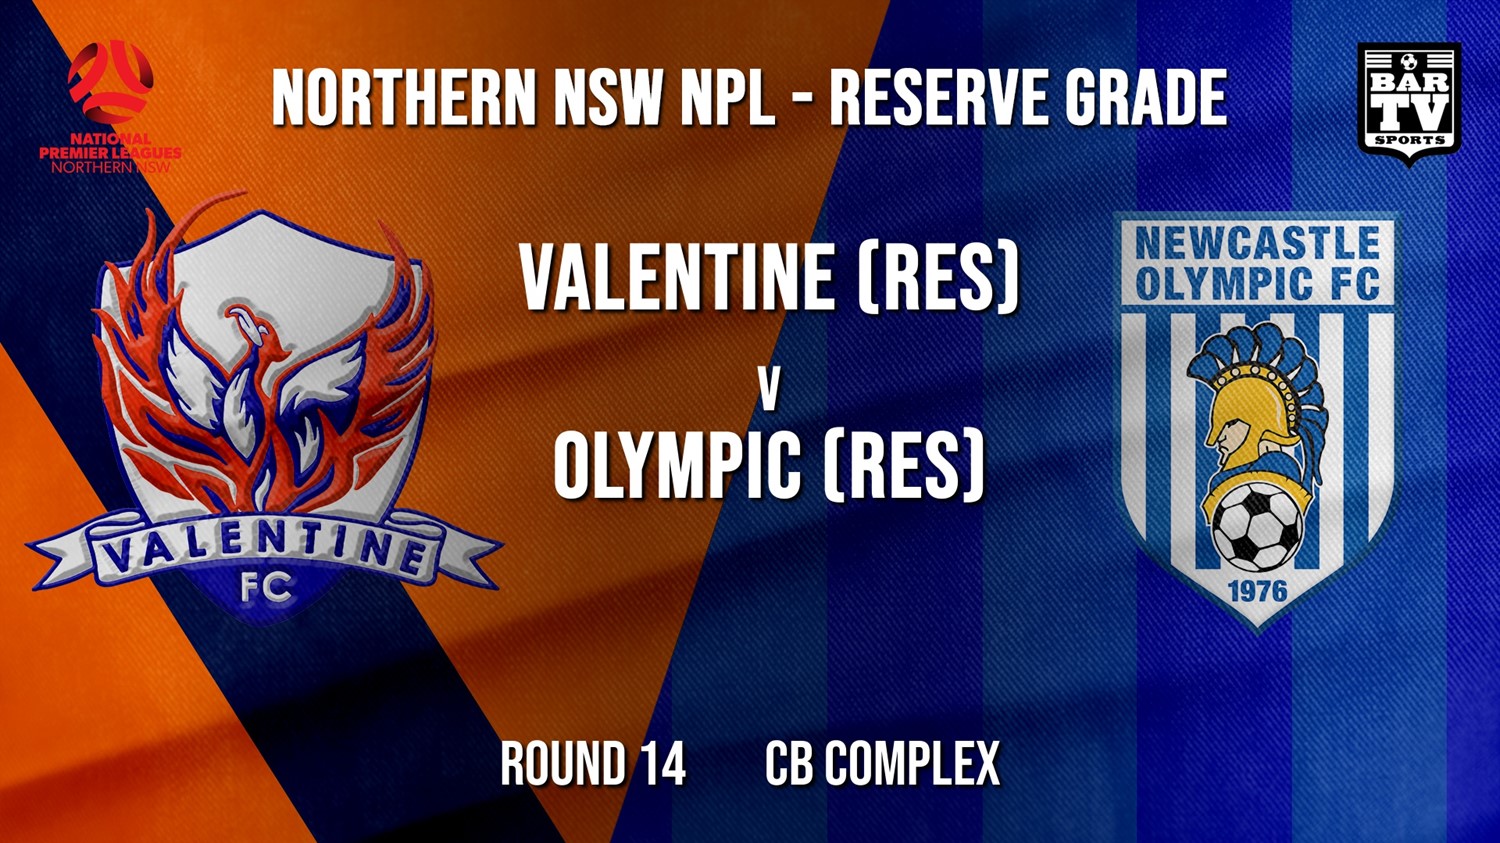 NPL NNSW RES Round 14 - Valentine Phoenix FC (Res) v Newcastle Olympic (Res) Minigame Slate Image